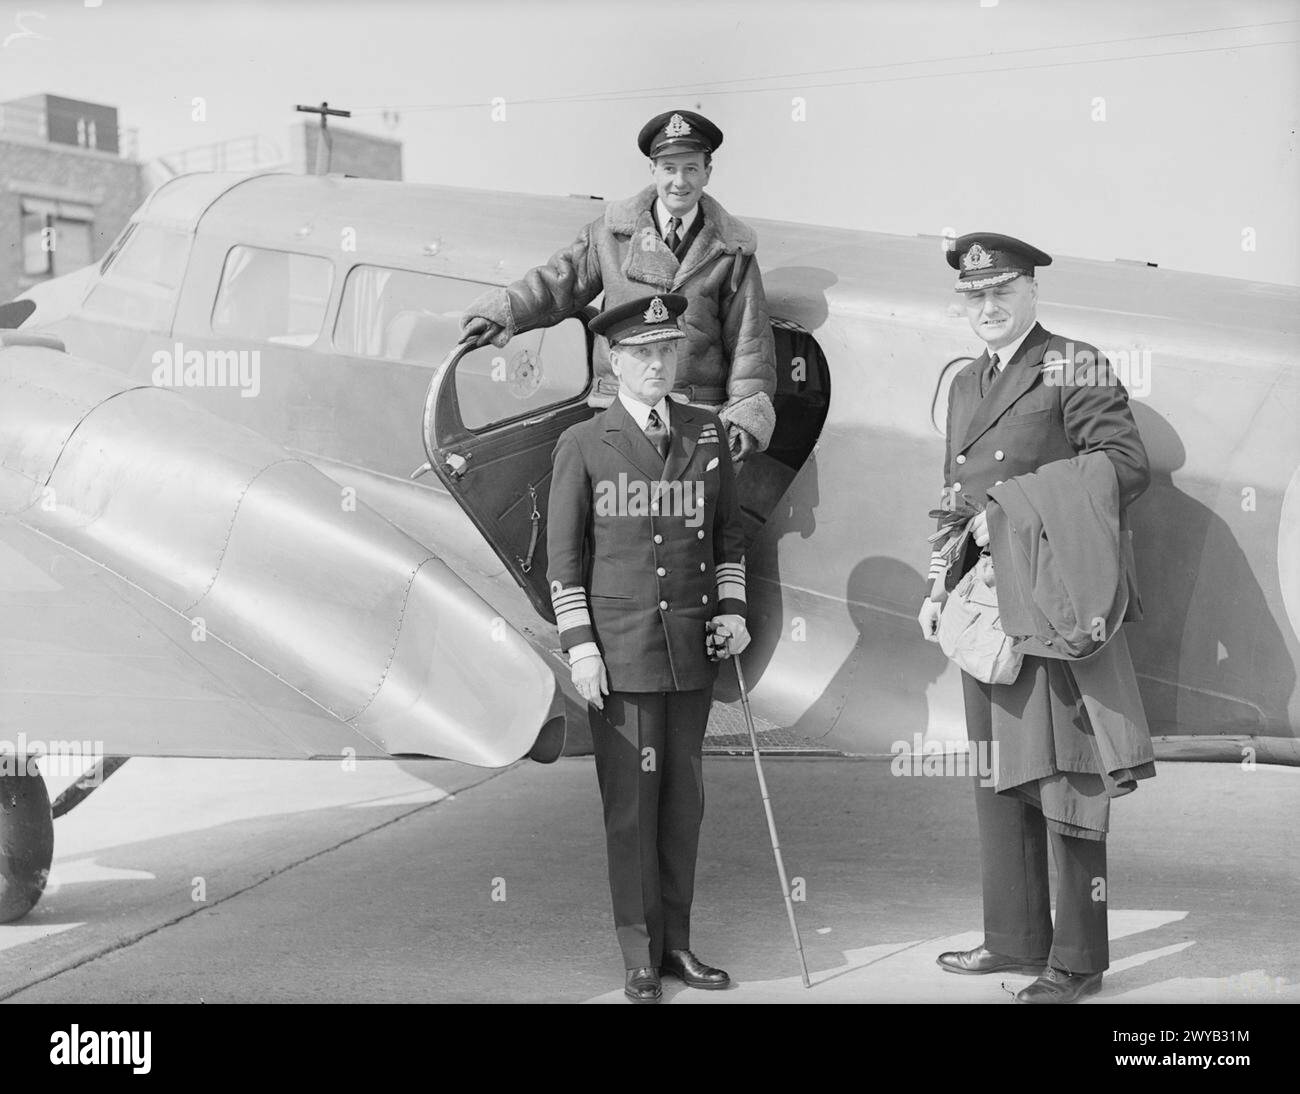 THE FLYING ADMIRAL. 1942, SPEKE AERODROME, LIVERPOOL. THE COMMANDER IN CHIEF WESTERN APPROACHES ADMIRAL SIR PERCY NOBLE, KCB, CVO, FLIES TO MOST EVERY PART OF HIS FAR FLUNG COMMAND. - Admiral Sir Percy Noble, KCB, CVO, about to enter his plane. With him are Captain Whitehorn, RN, and Lieut G C Wilby, RNVR, the Admiral's personal pilot. , Stock Photo